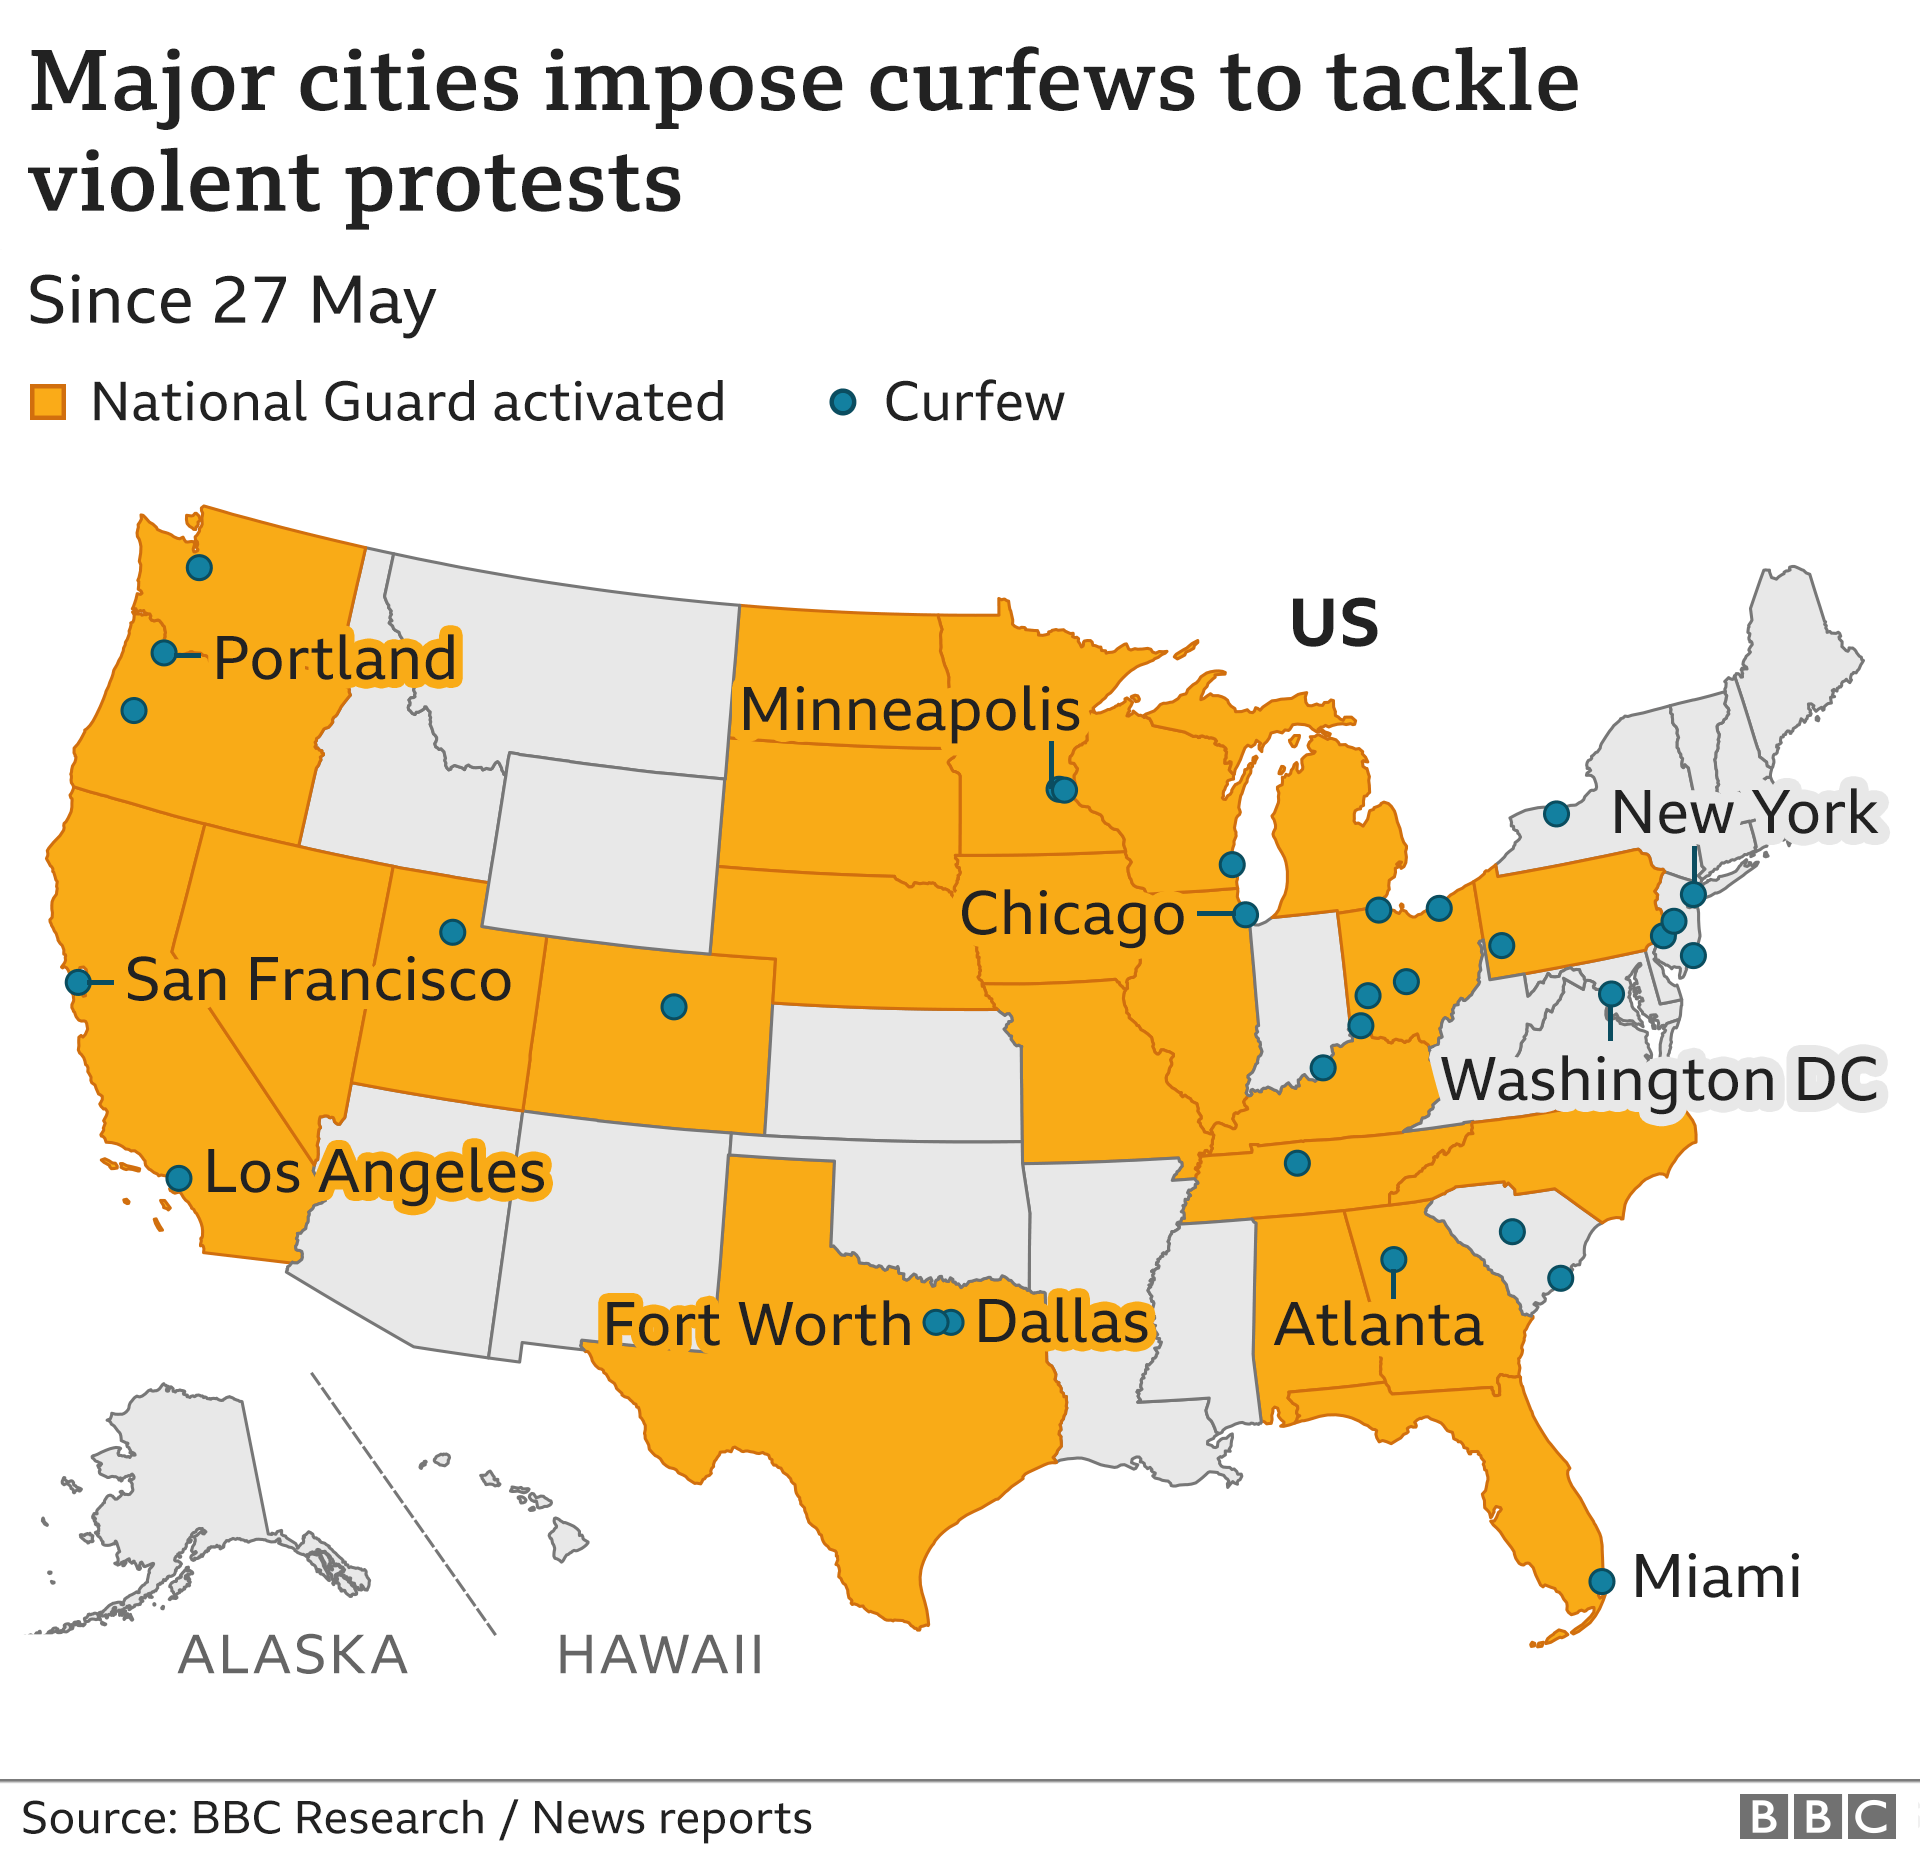 A map of major cities that have imposed curfews as unrest spreads across the US